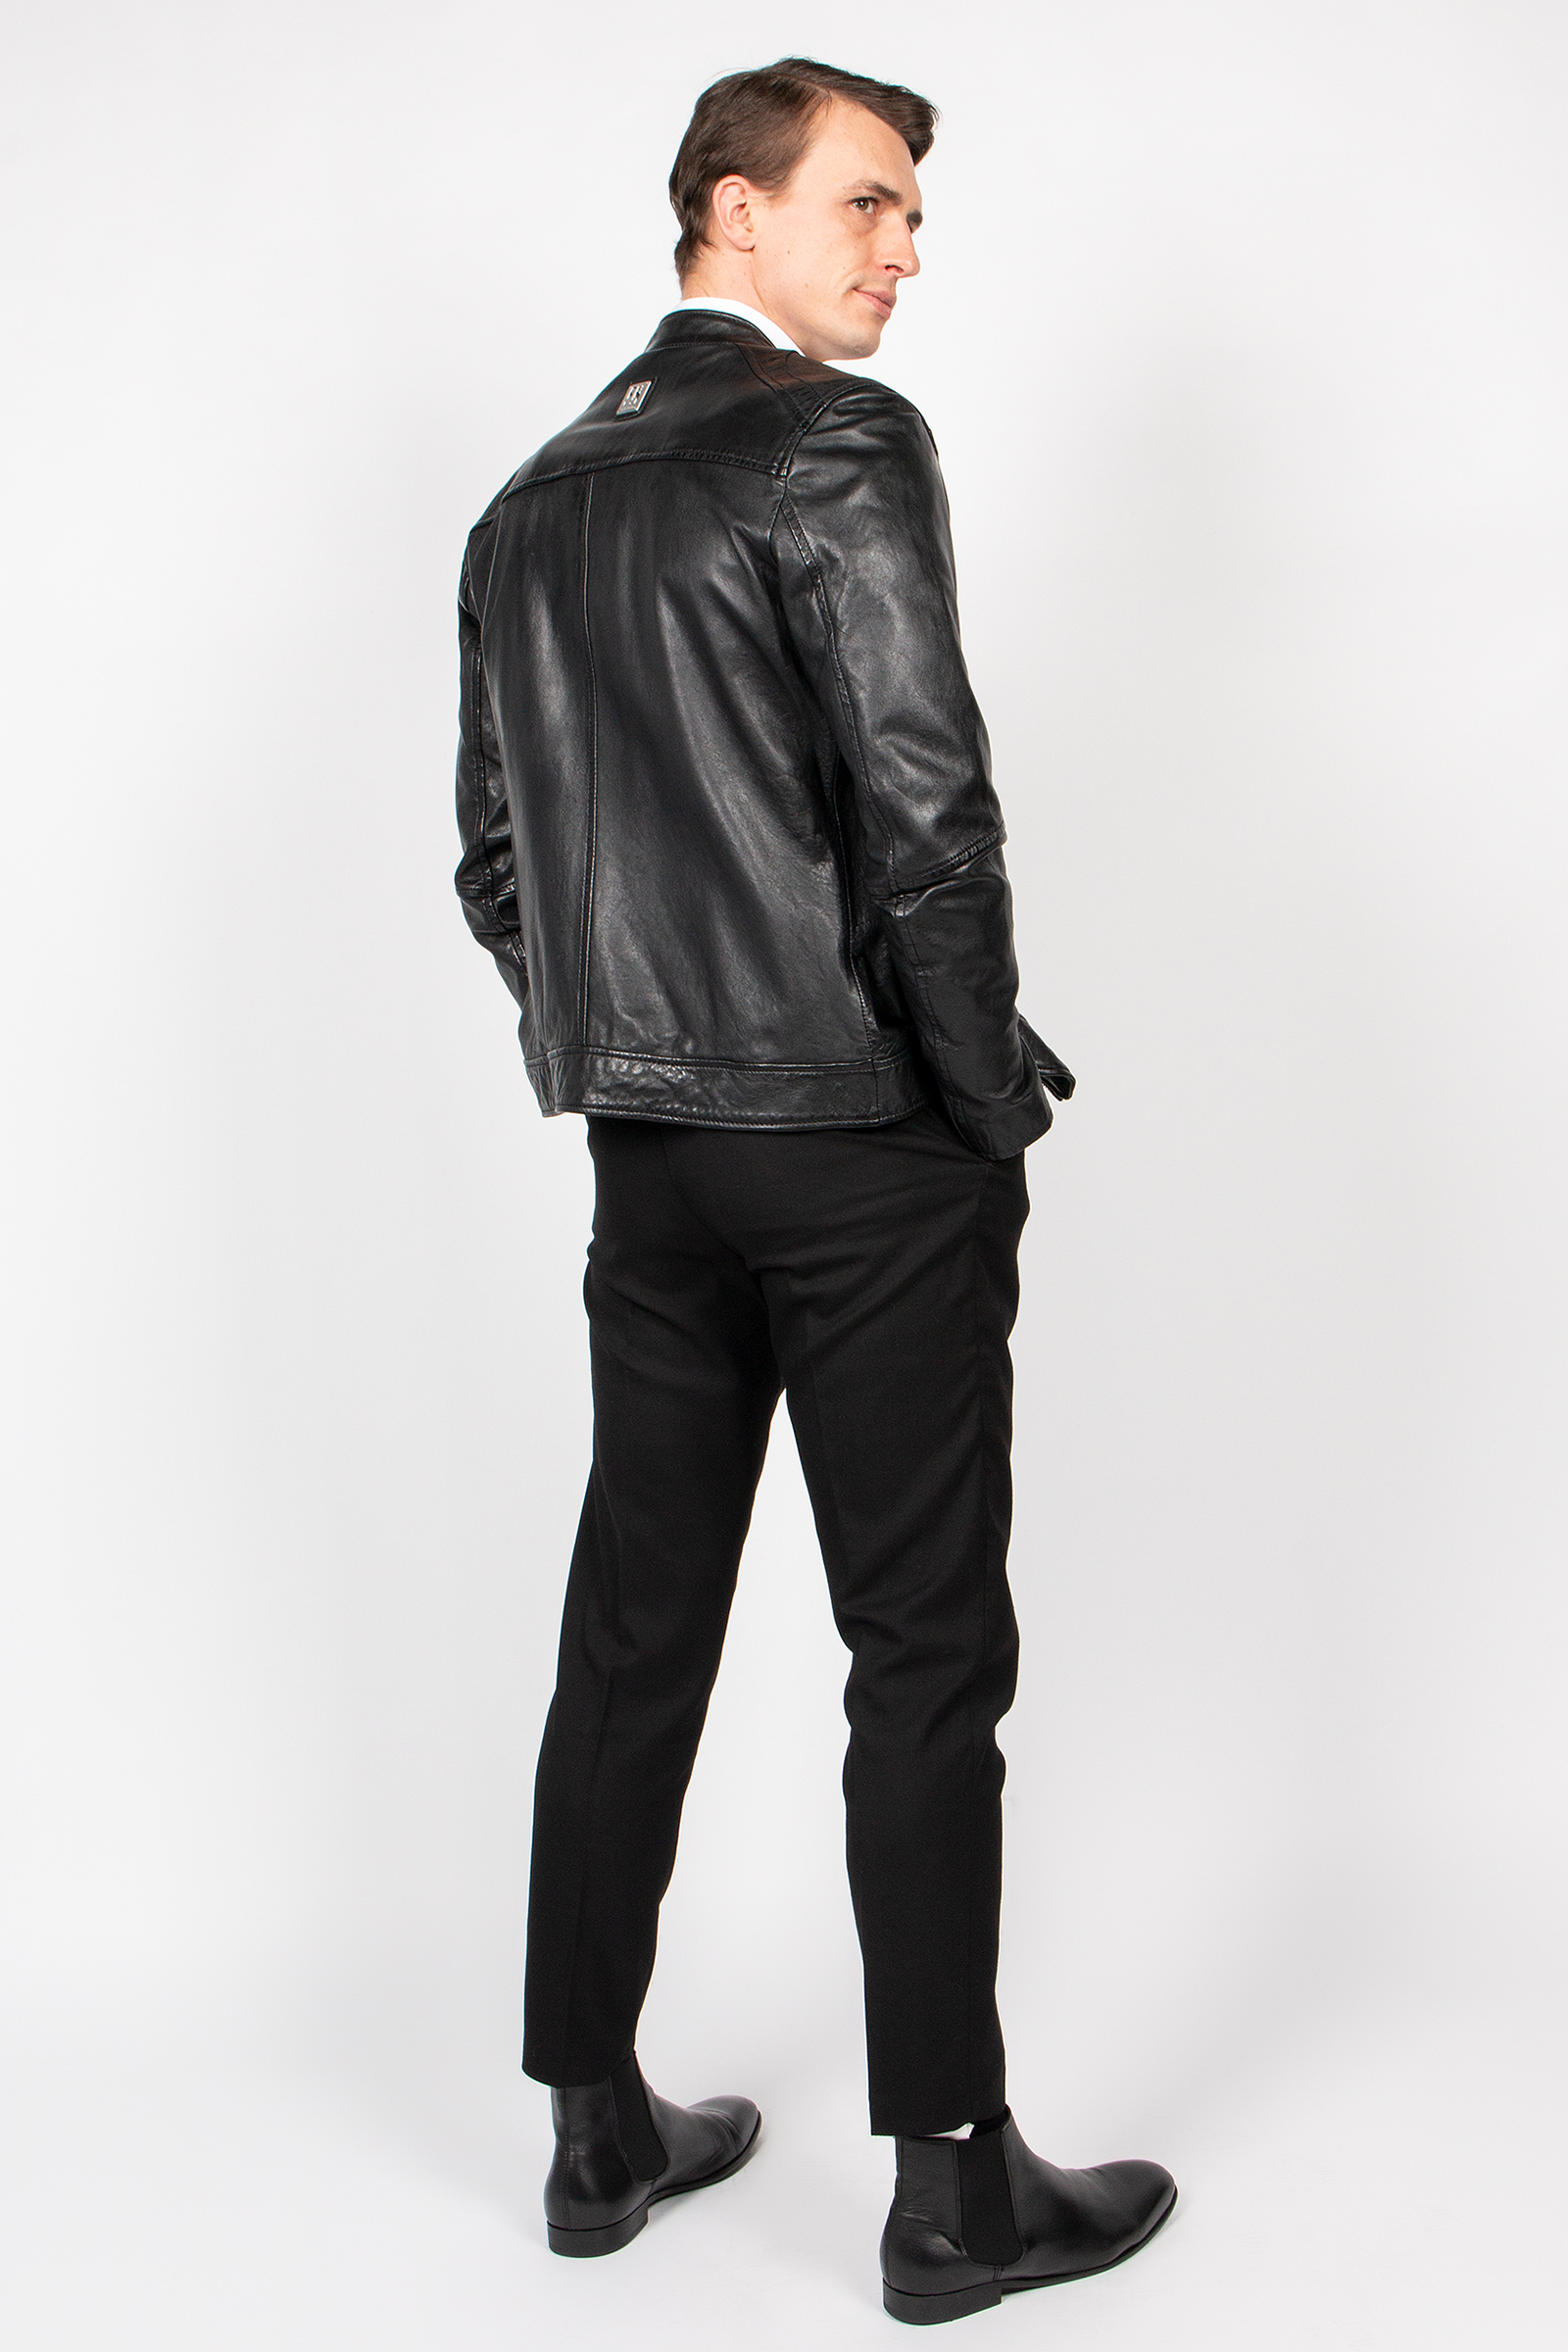 Nation | | Jim-FN Lucky Freaky Jackets Leather | Men